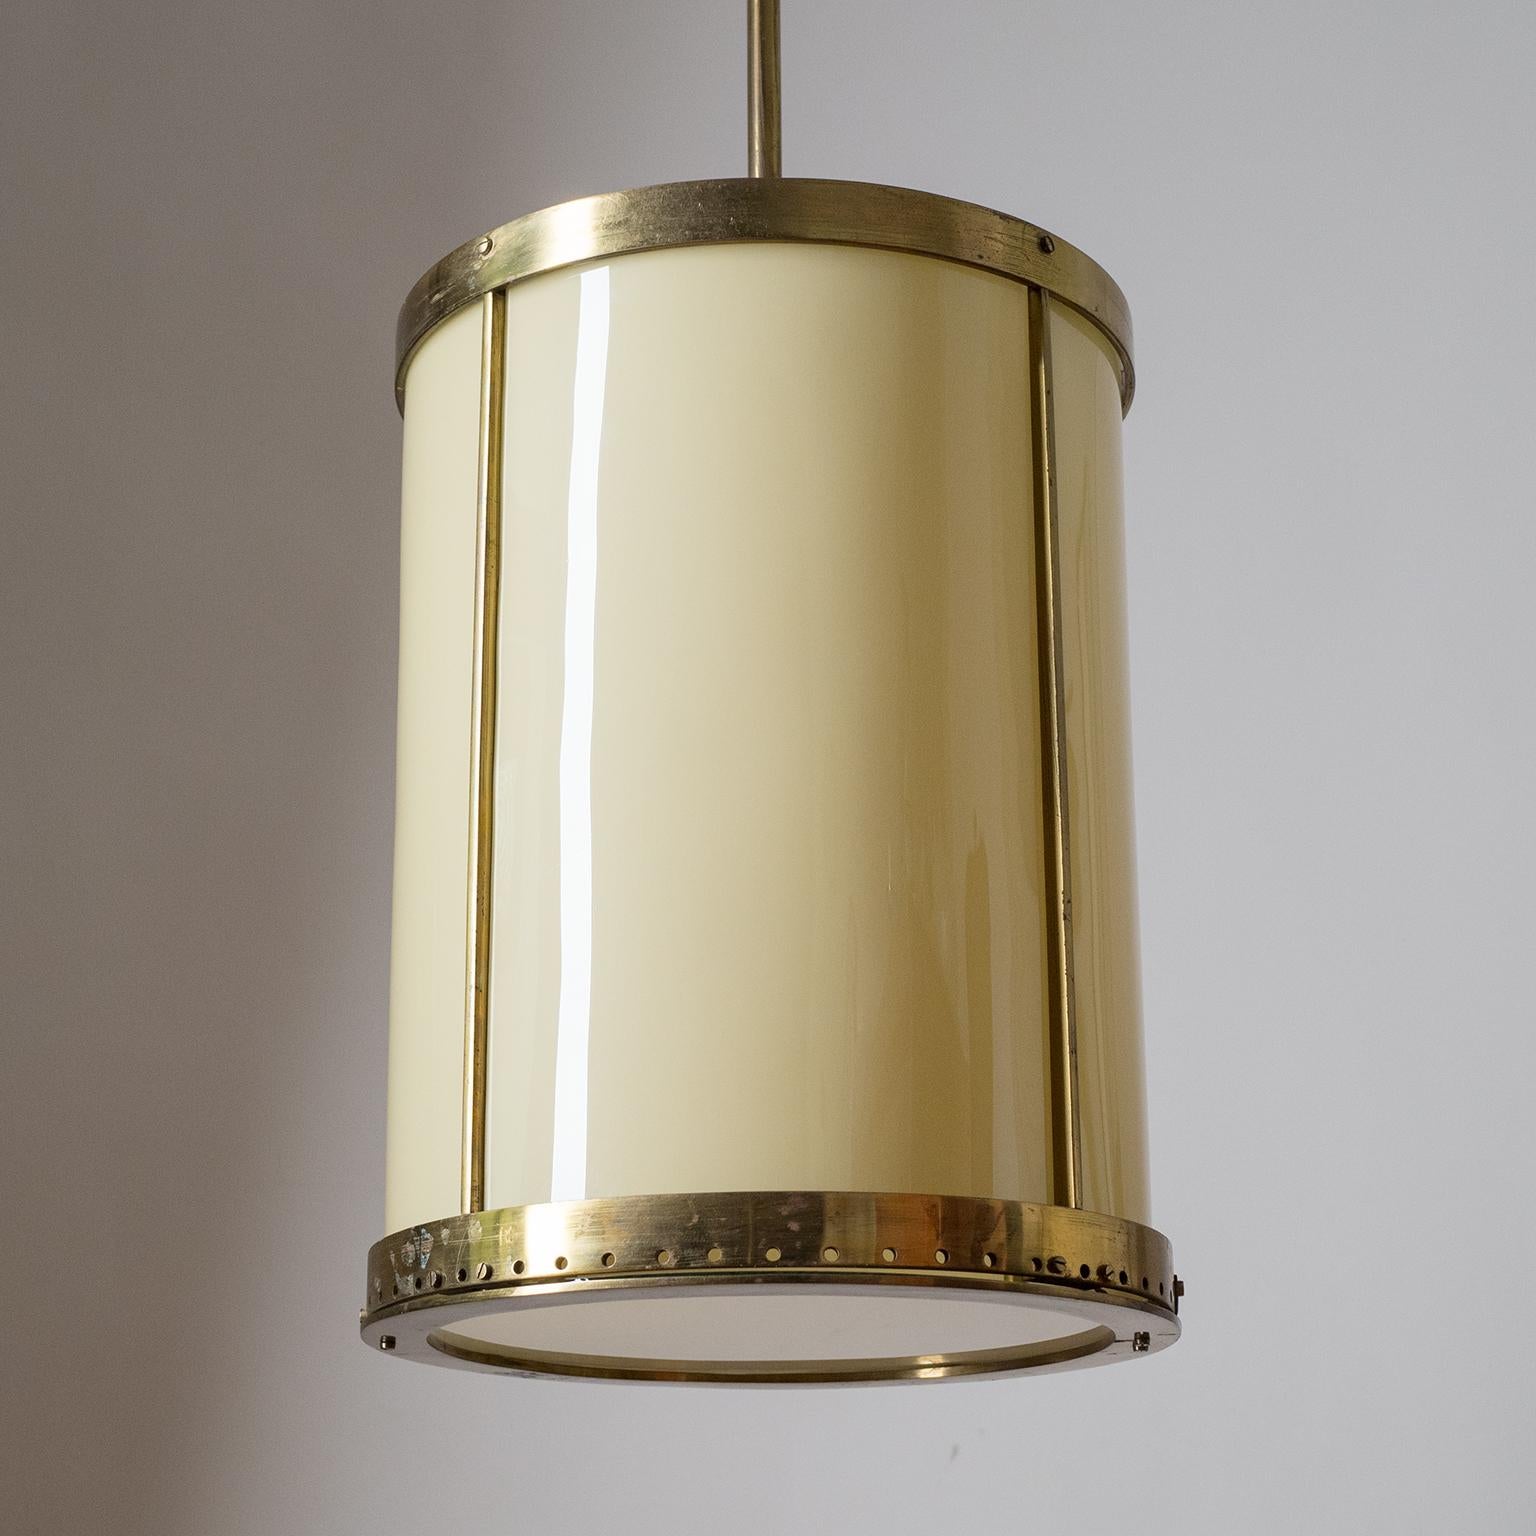 Oversize Drum Lantern, 1930s, Sand-Colored Glass and Brass For Sale 10